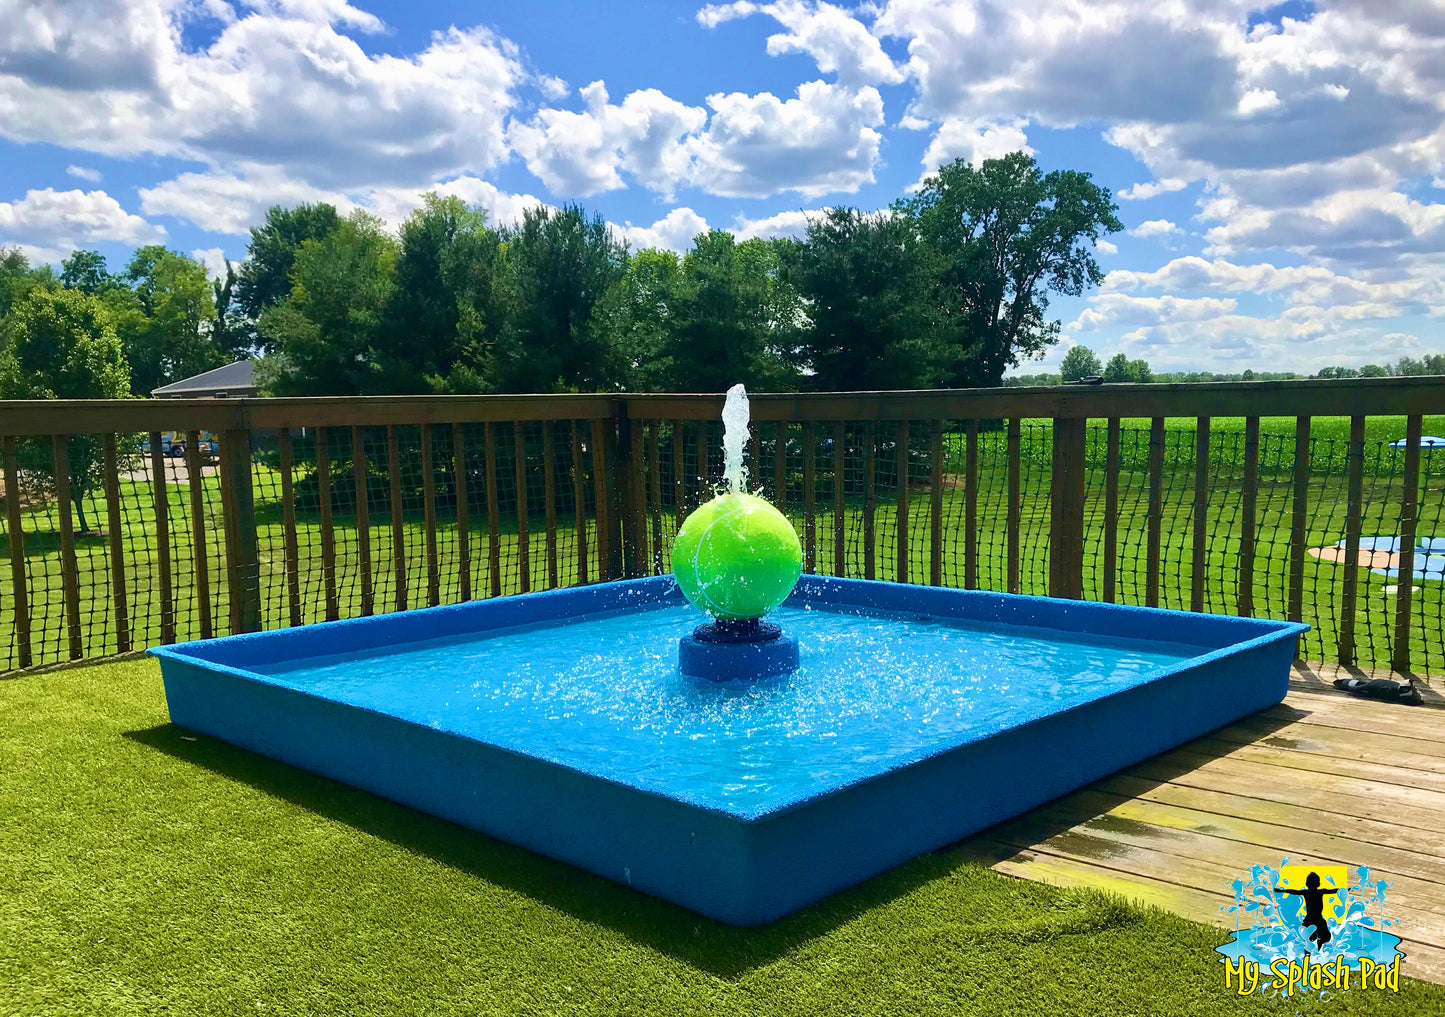 Tennis Ball Portable Water Play Features